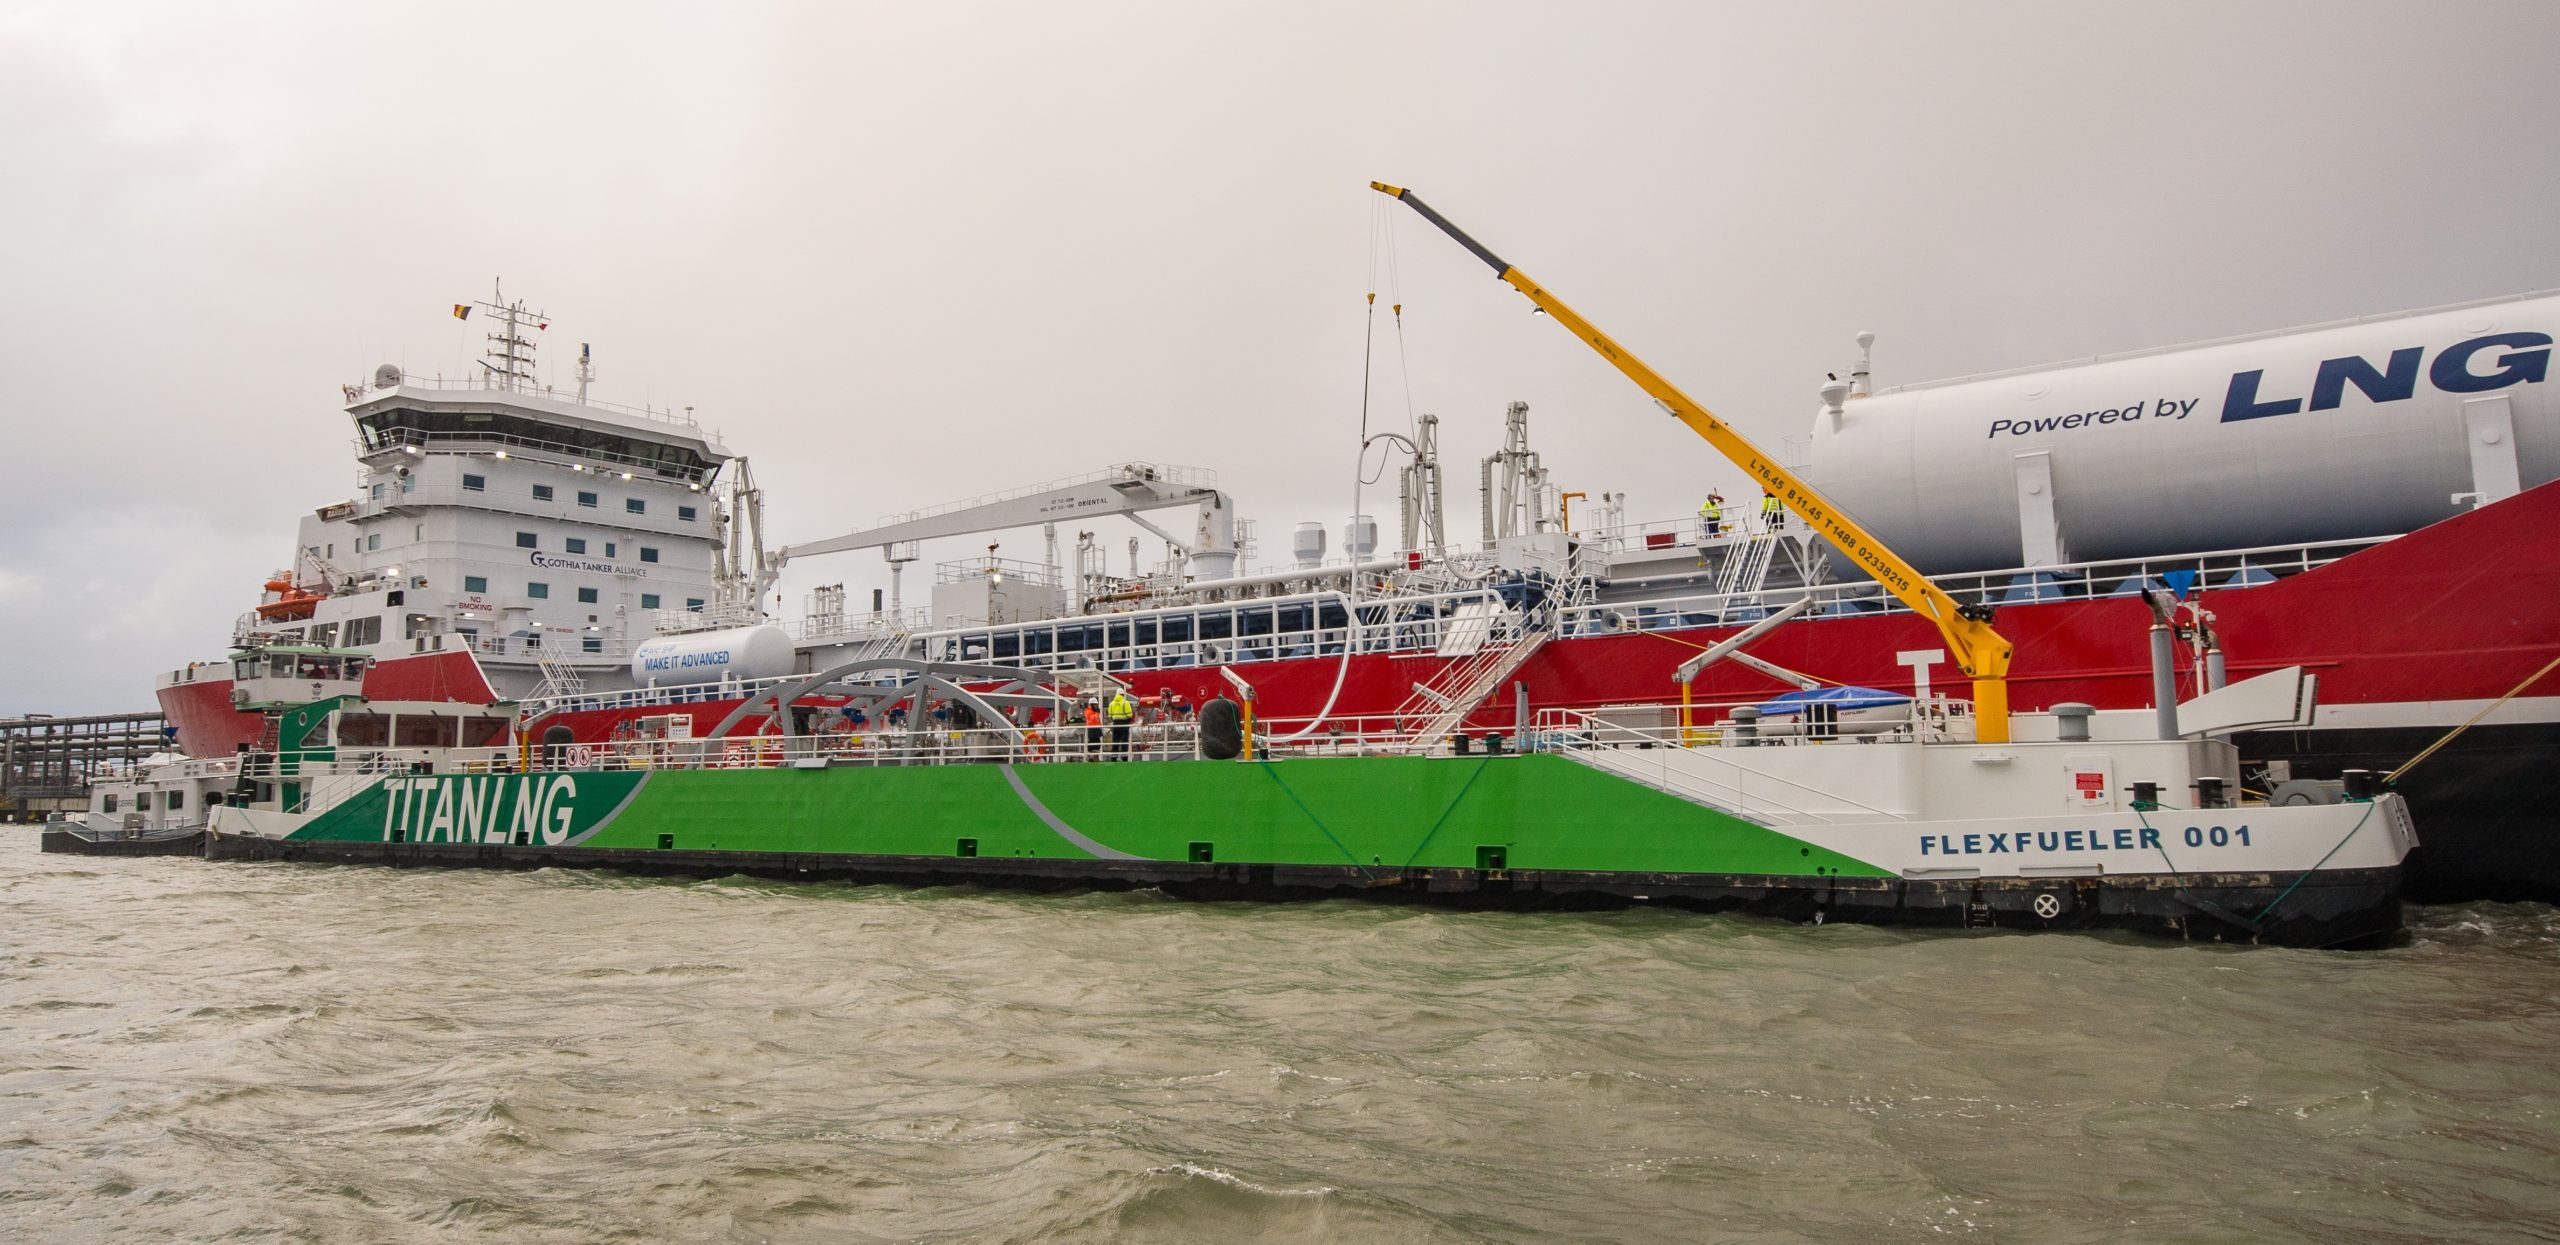 Titan LNG develops new tank concept for bunkering barges